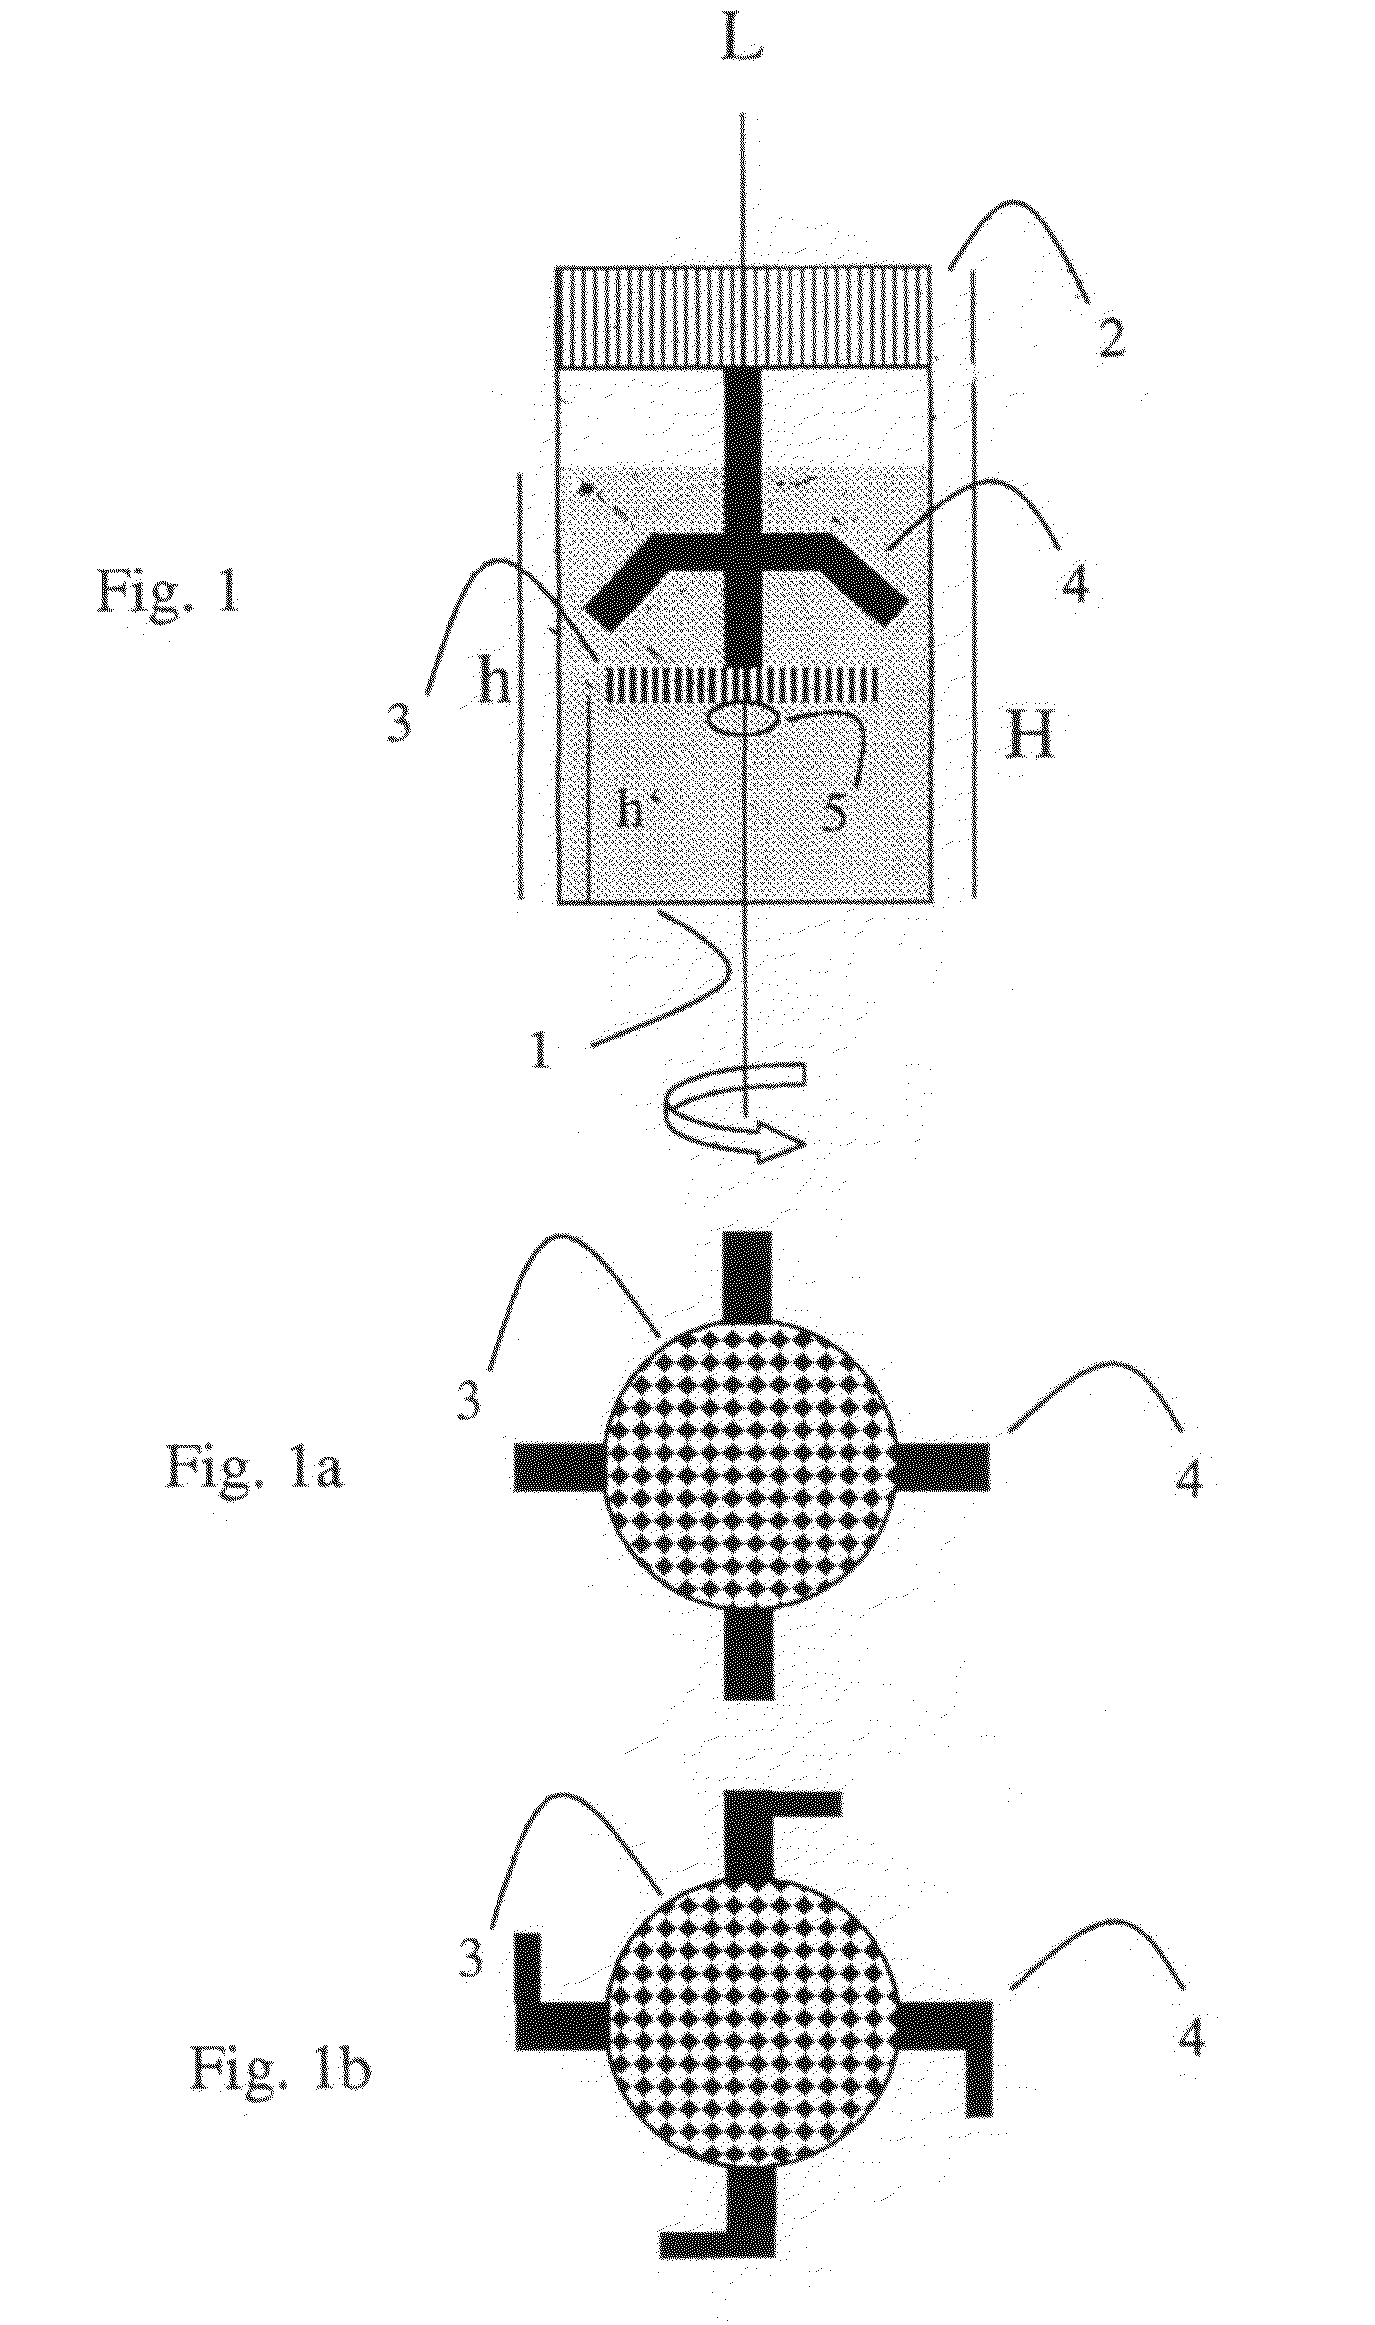 Method for treating a biological sample with a composition containing at least one polyol and excluding water